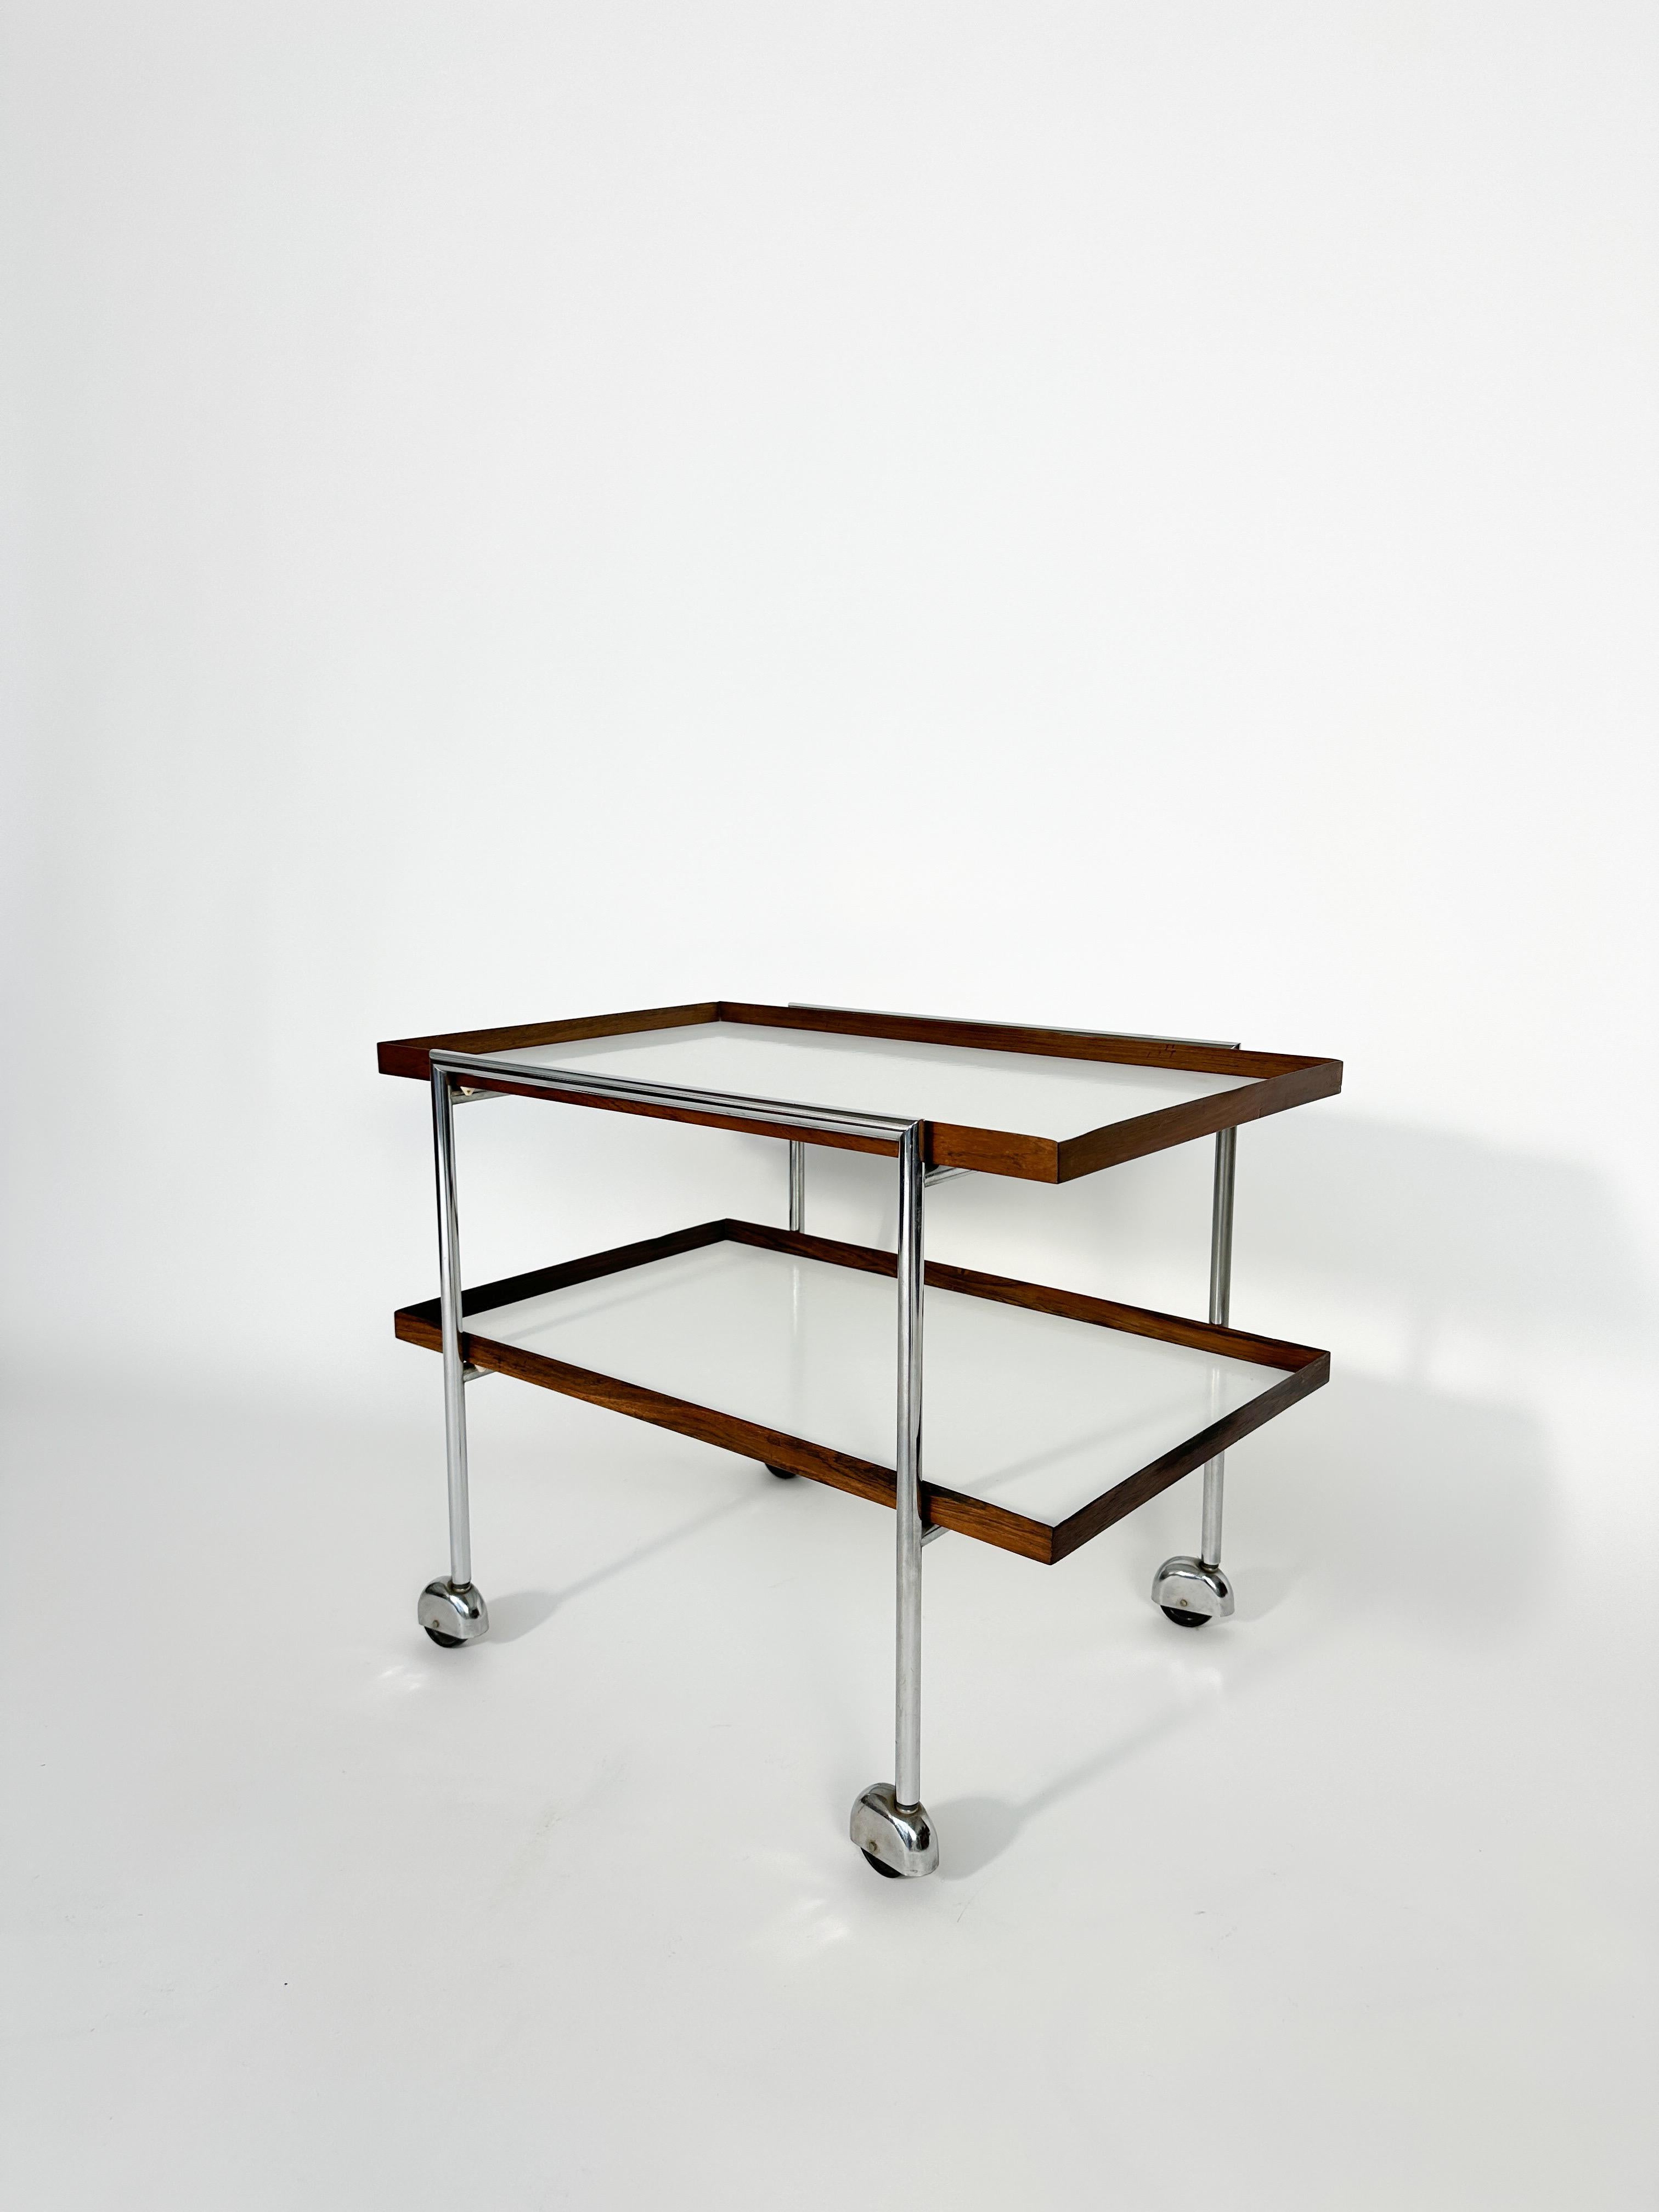 A rare Poul Nørreklit bar cart for E. Pedersen & Son, made in Denmark in the 1960s.

Chromed steel frame with rosewood framed formica trays.

Good condition with normal signs of use and age. A few spots on one of the trays, partly worn edge on one